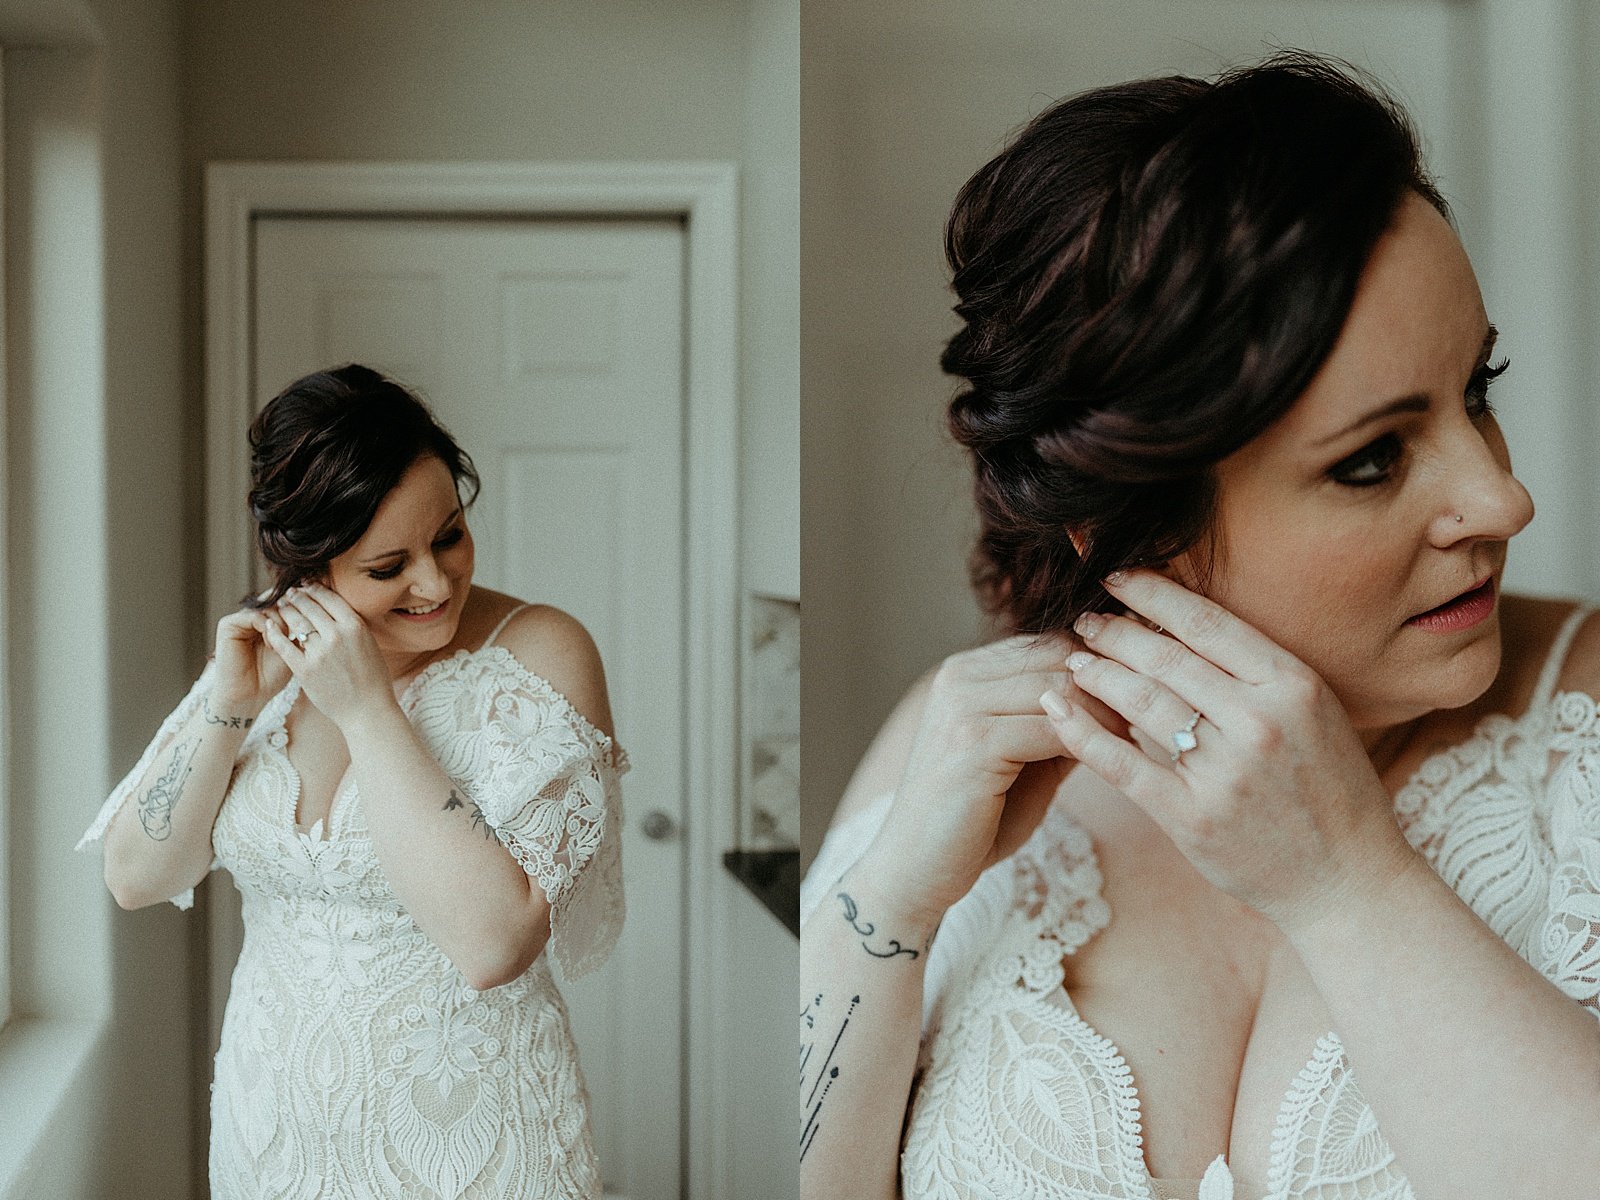  Bride in white robe putting on her earring by Anchorage elopement photographer, Rachel Struve 